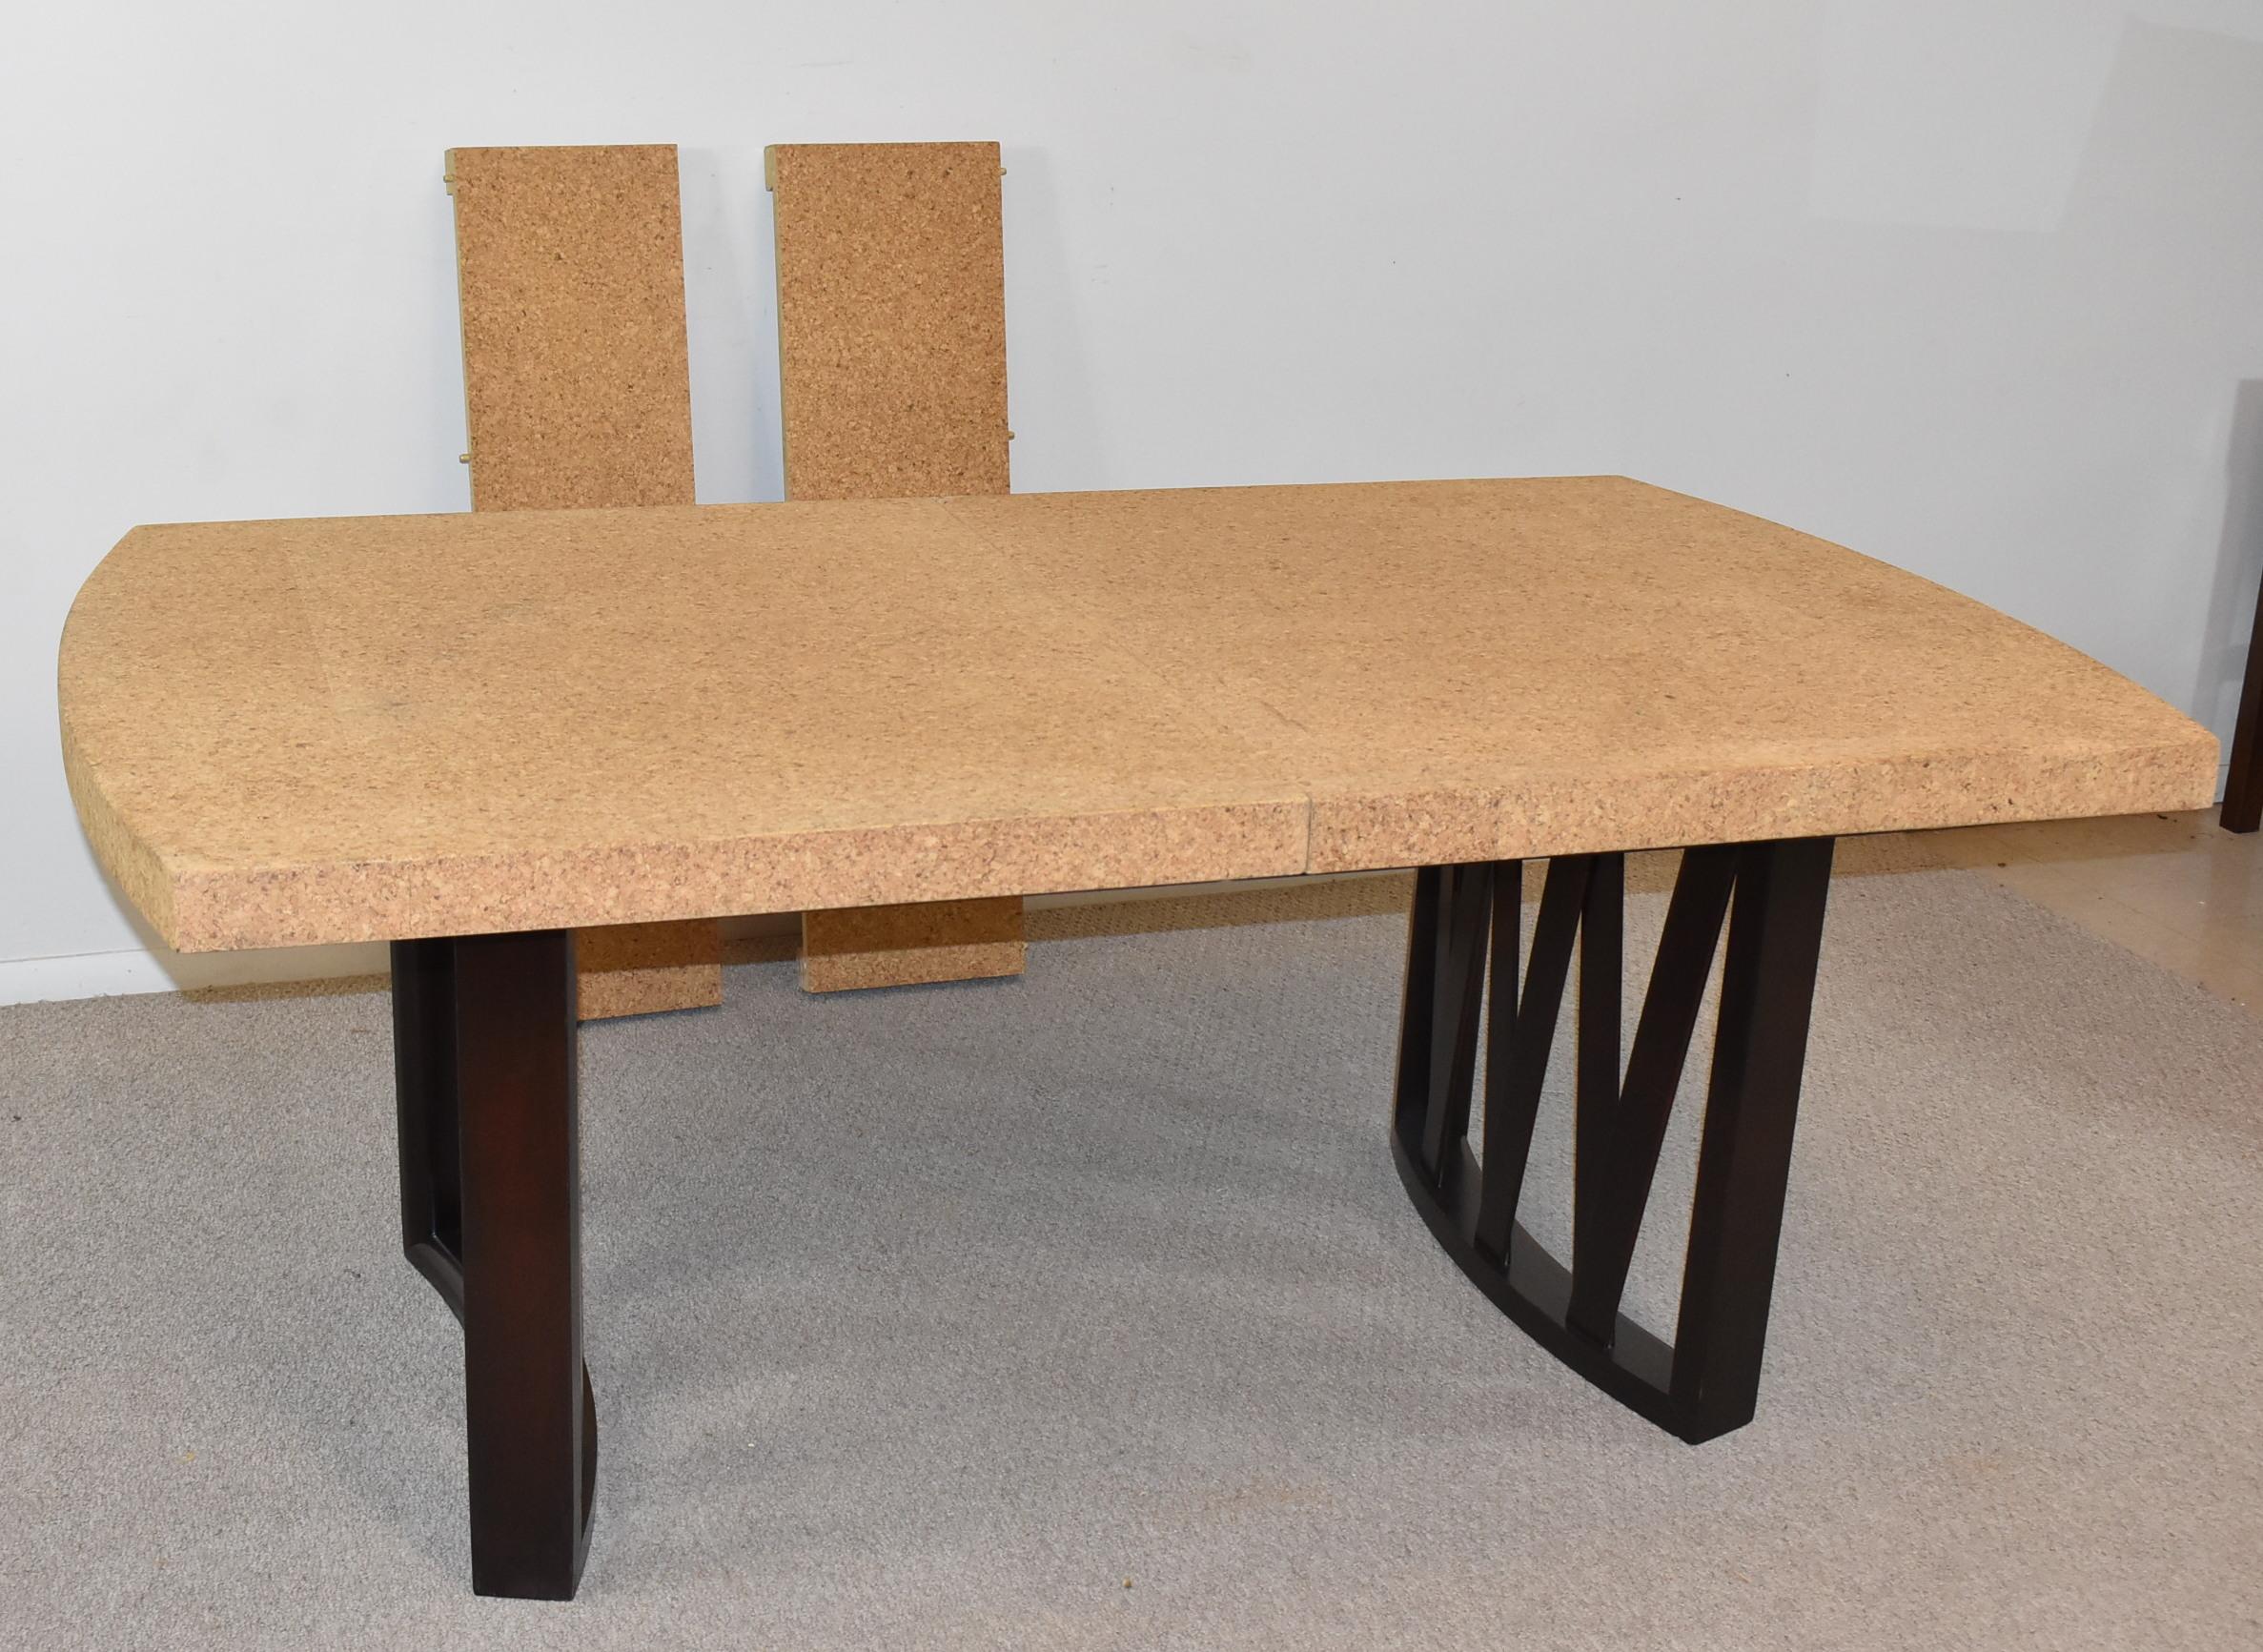 This cork top dining table was designed by Paul Frankl for Johnson Furniture Company. The top is natural cork with curved walnut support legs. The legs have an ebonized finish with decorative crisscross slats. The table is 72